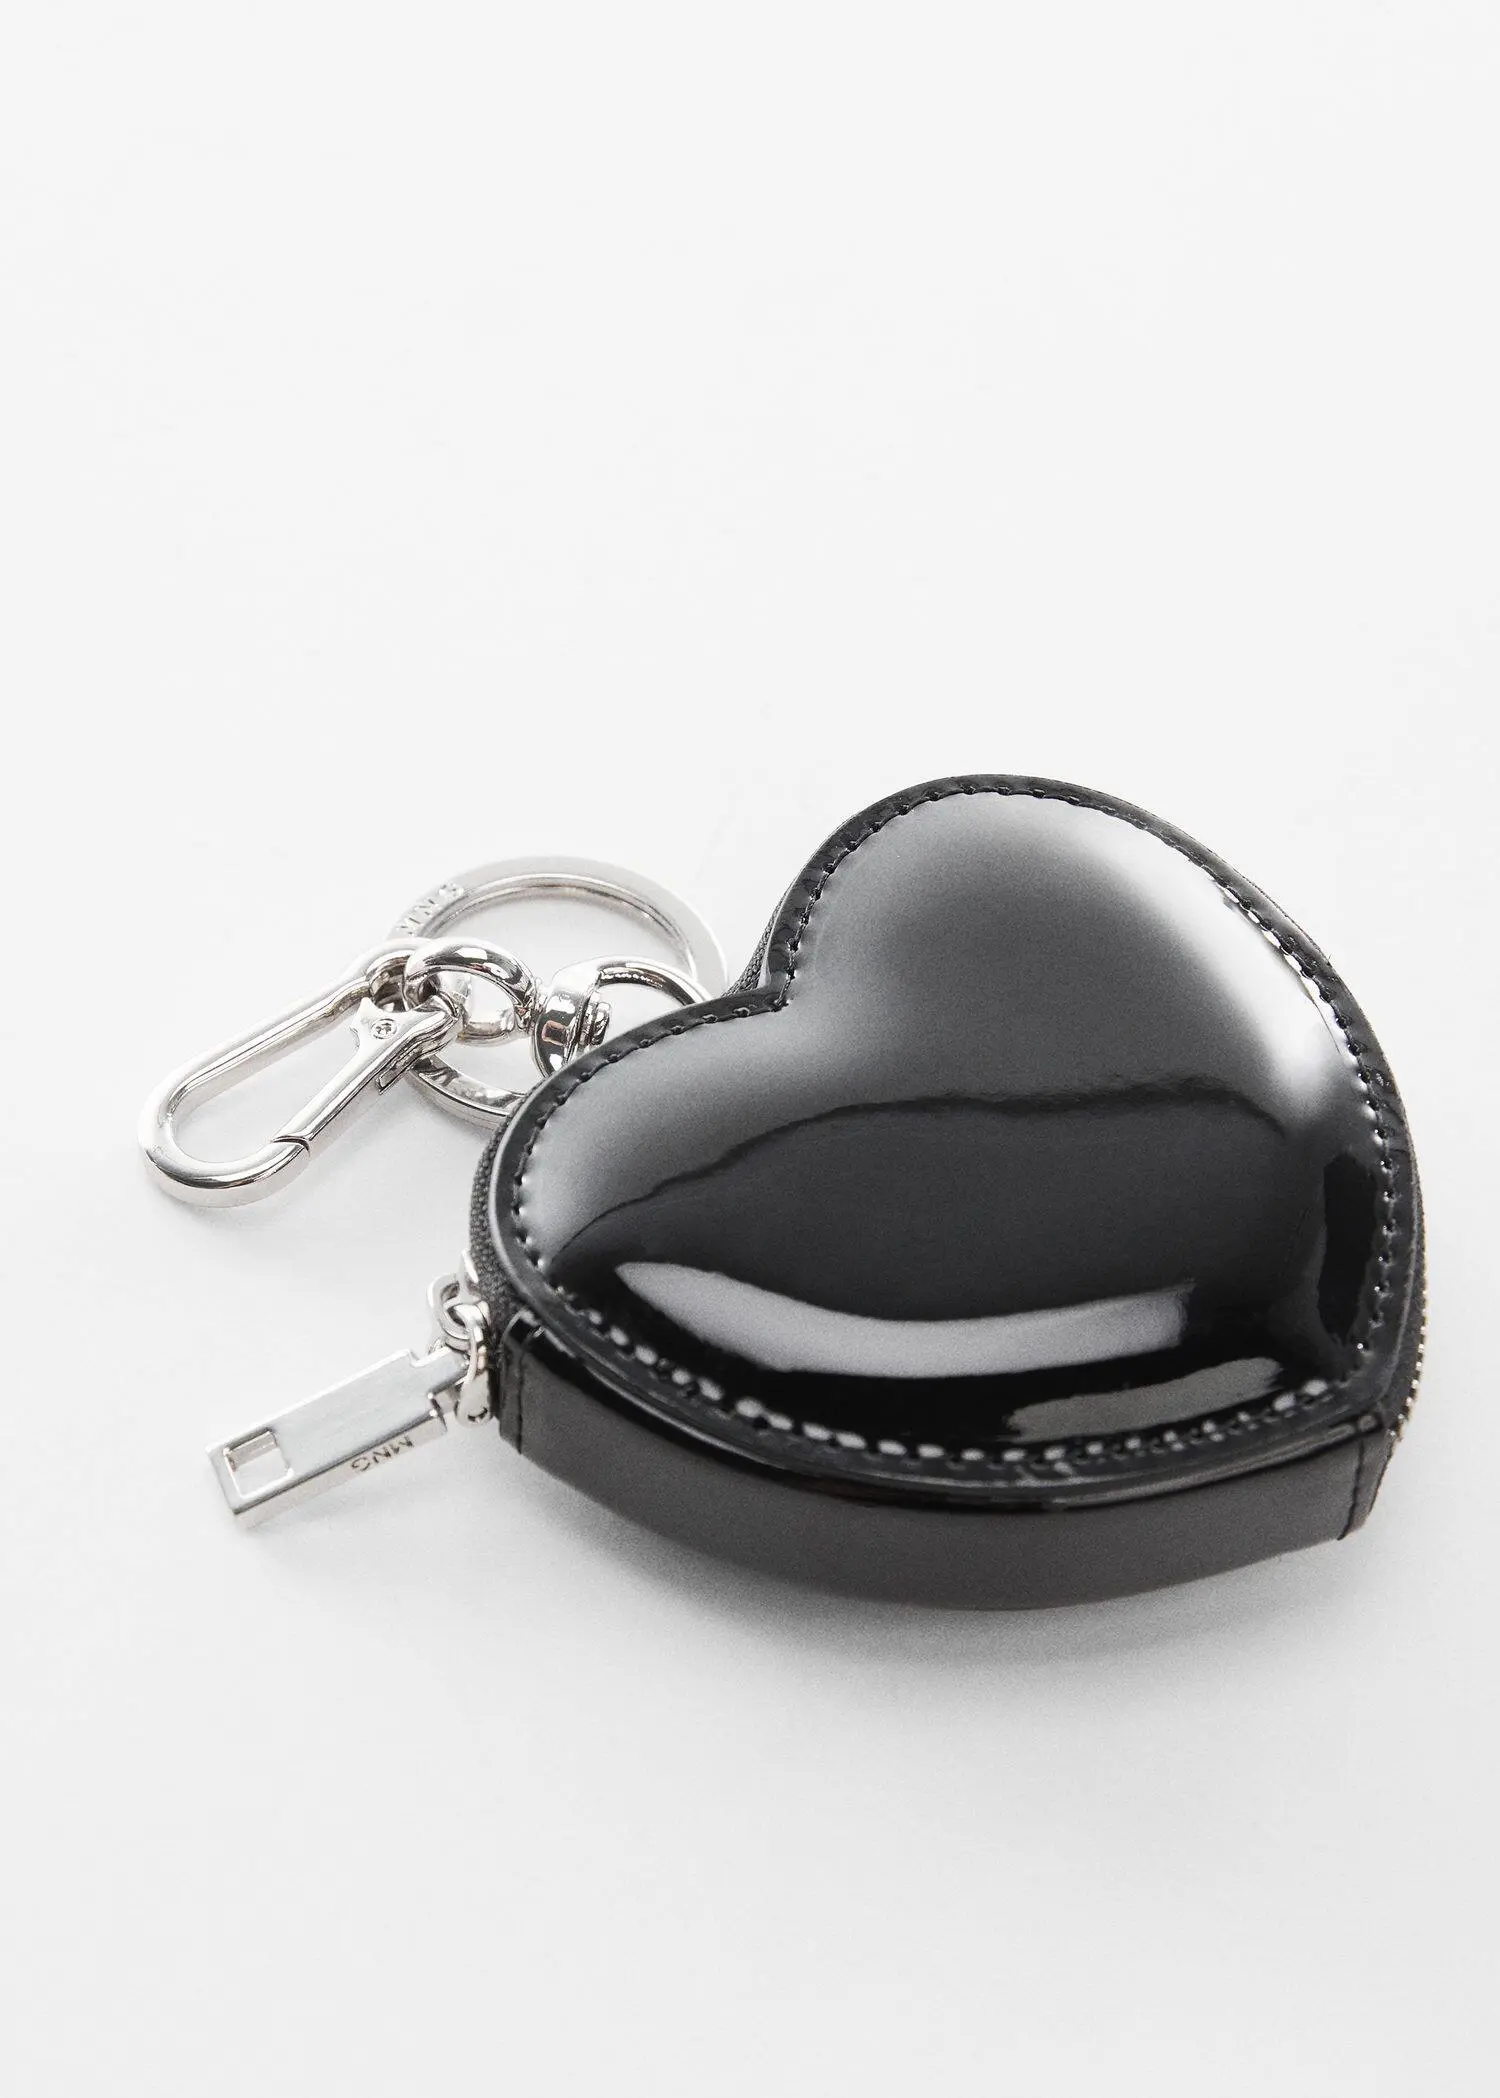 Mango Wallet with heart keychain . 1